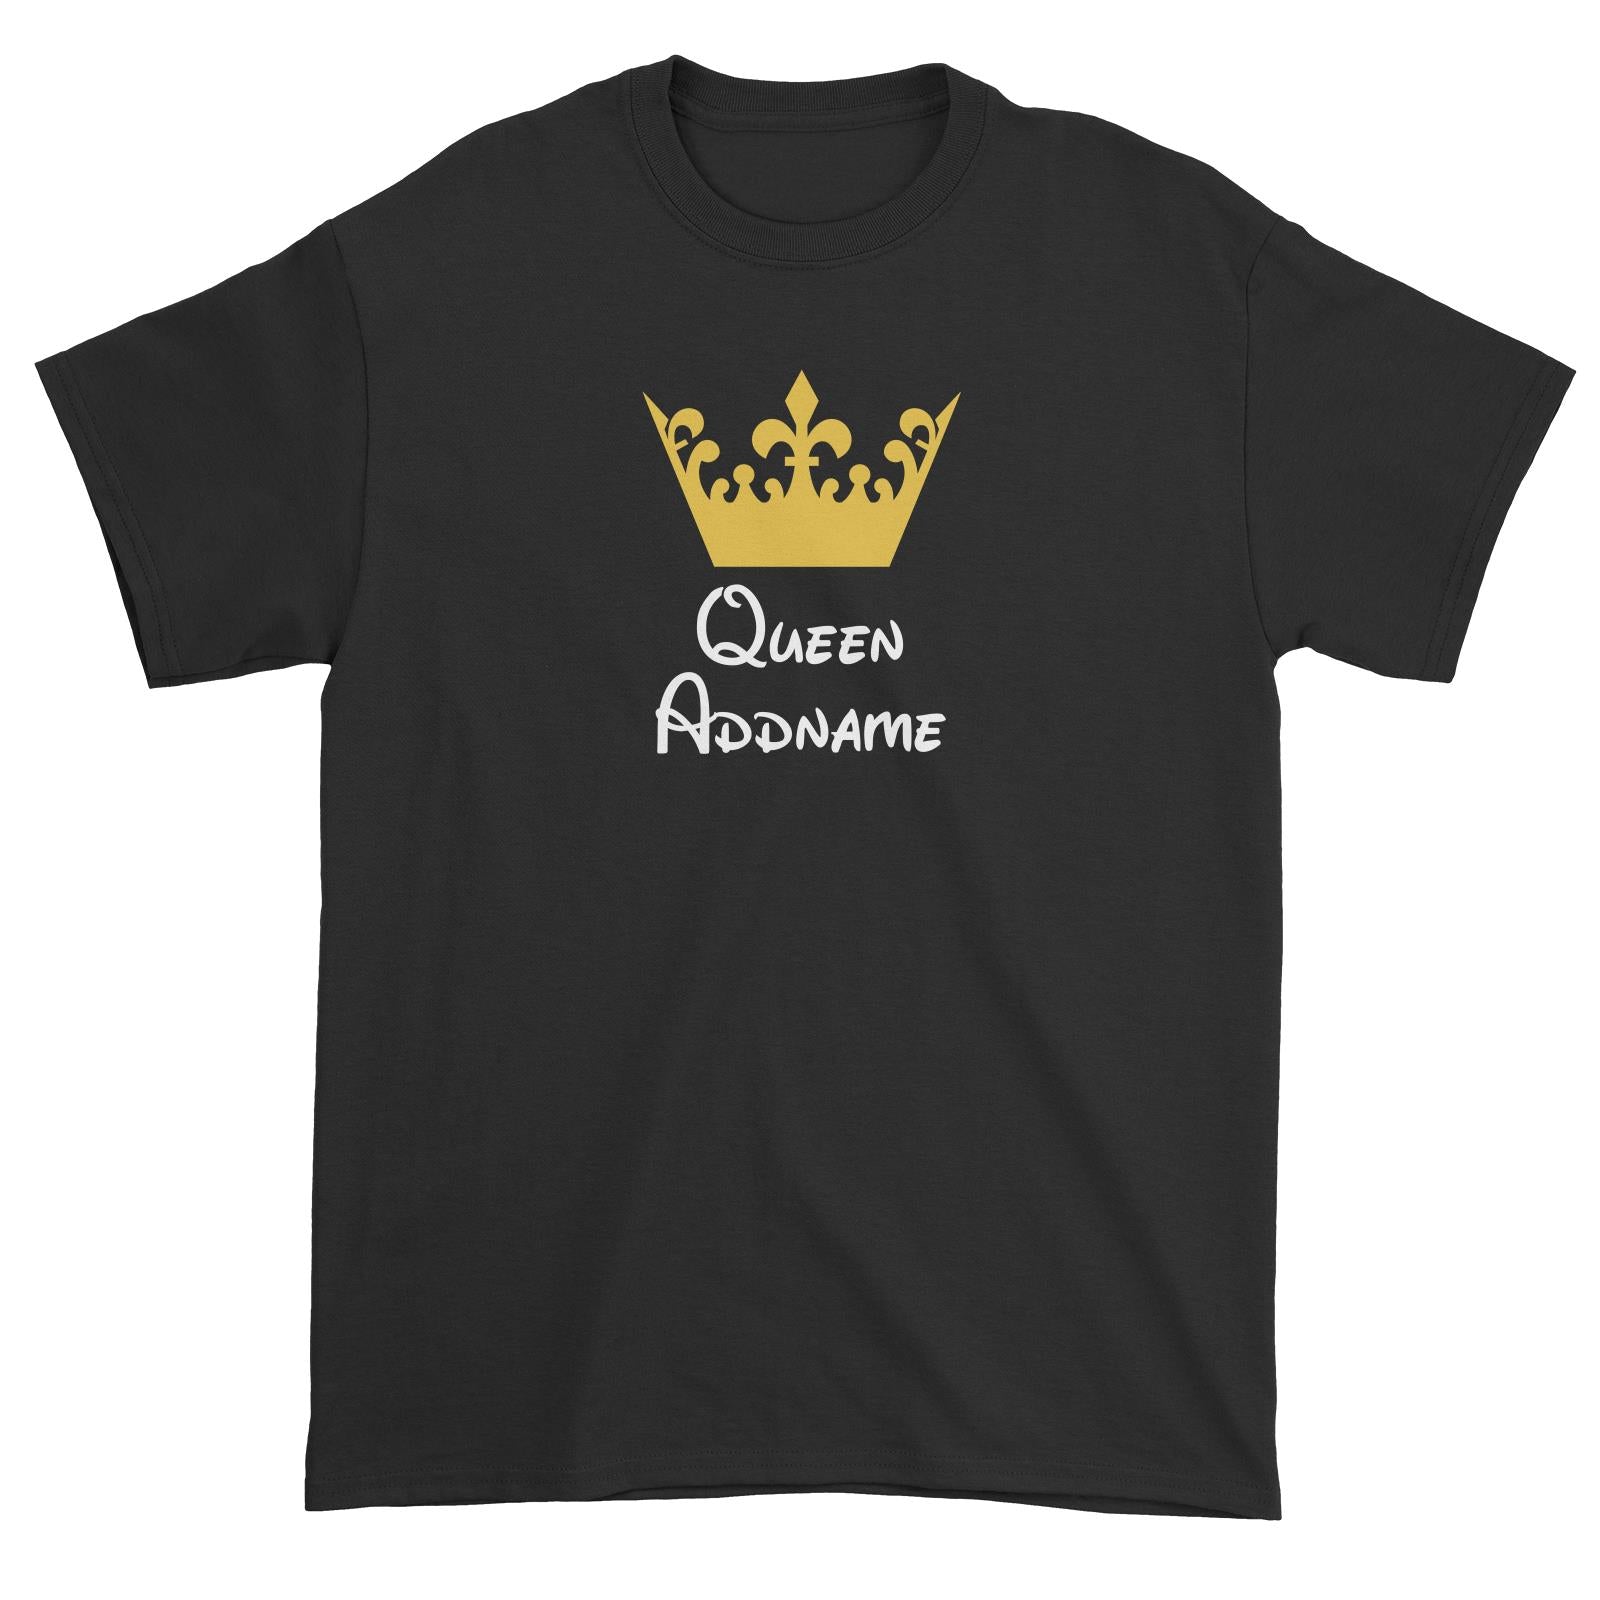 Royal Queen with Tiara Addname Unisex T-Shirt